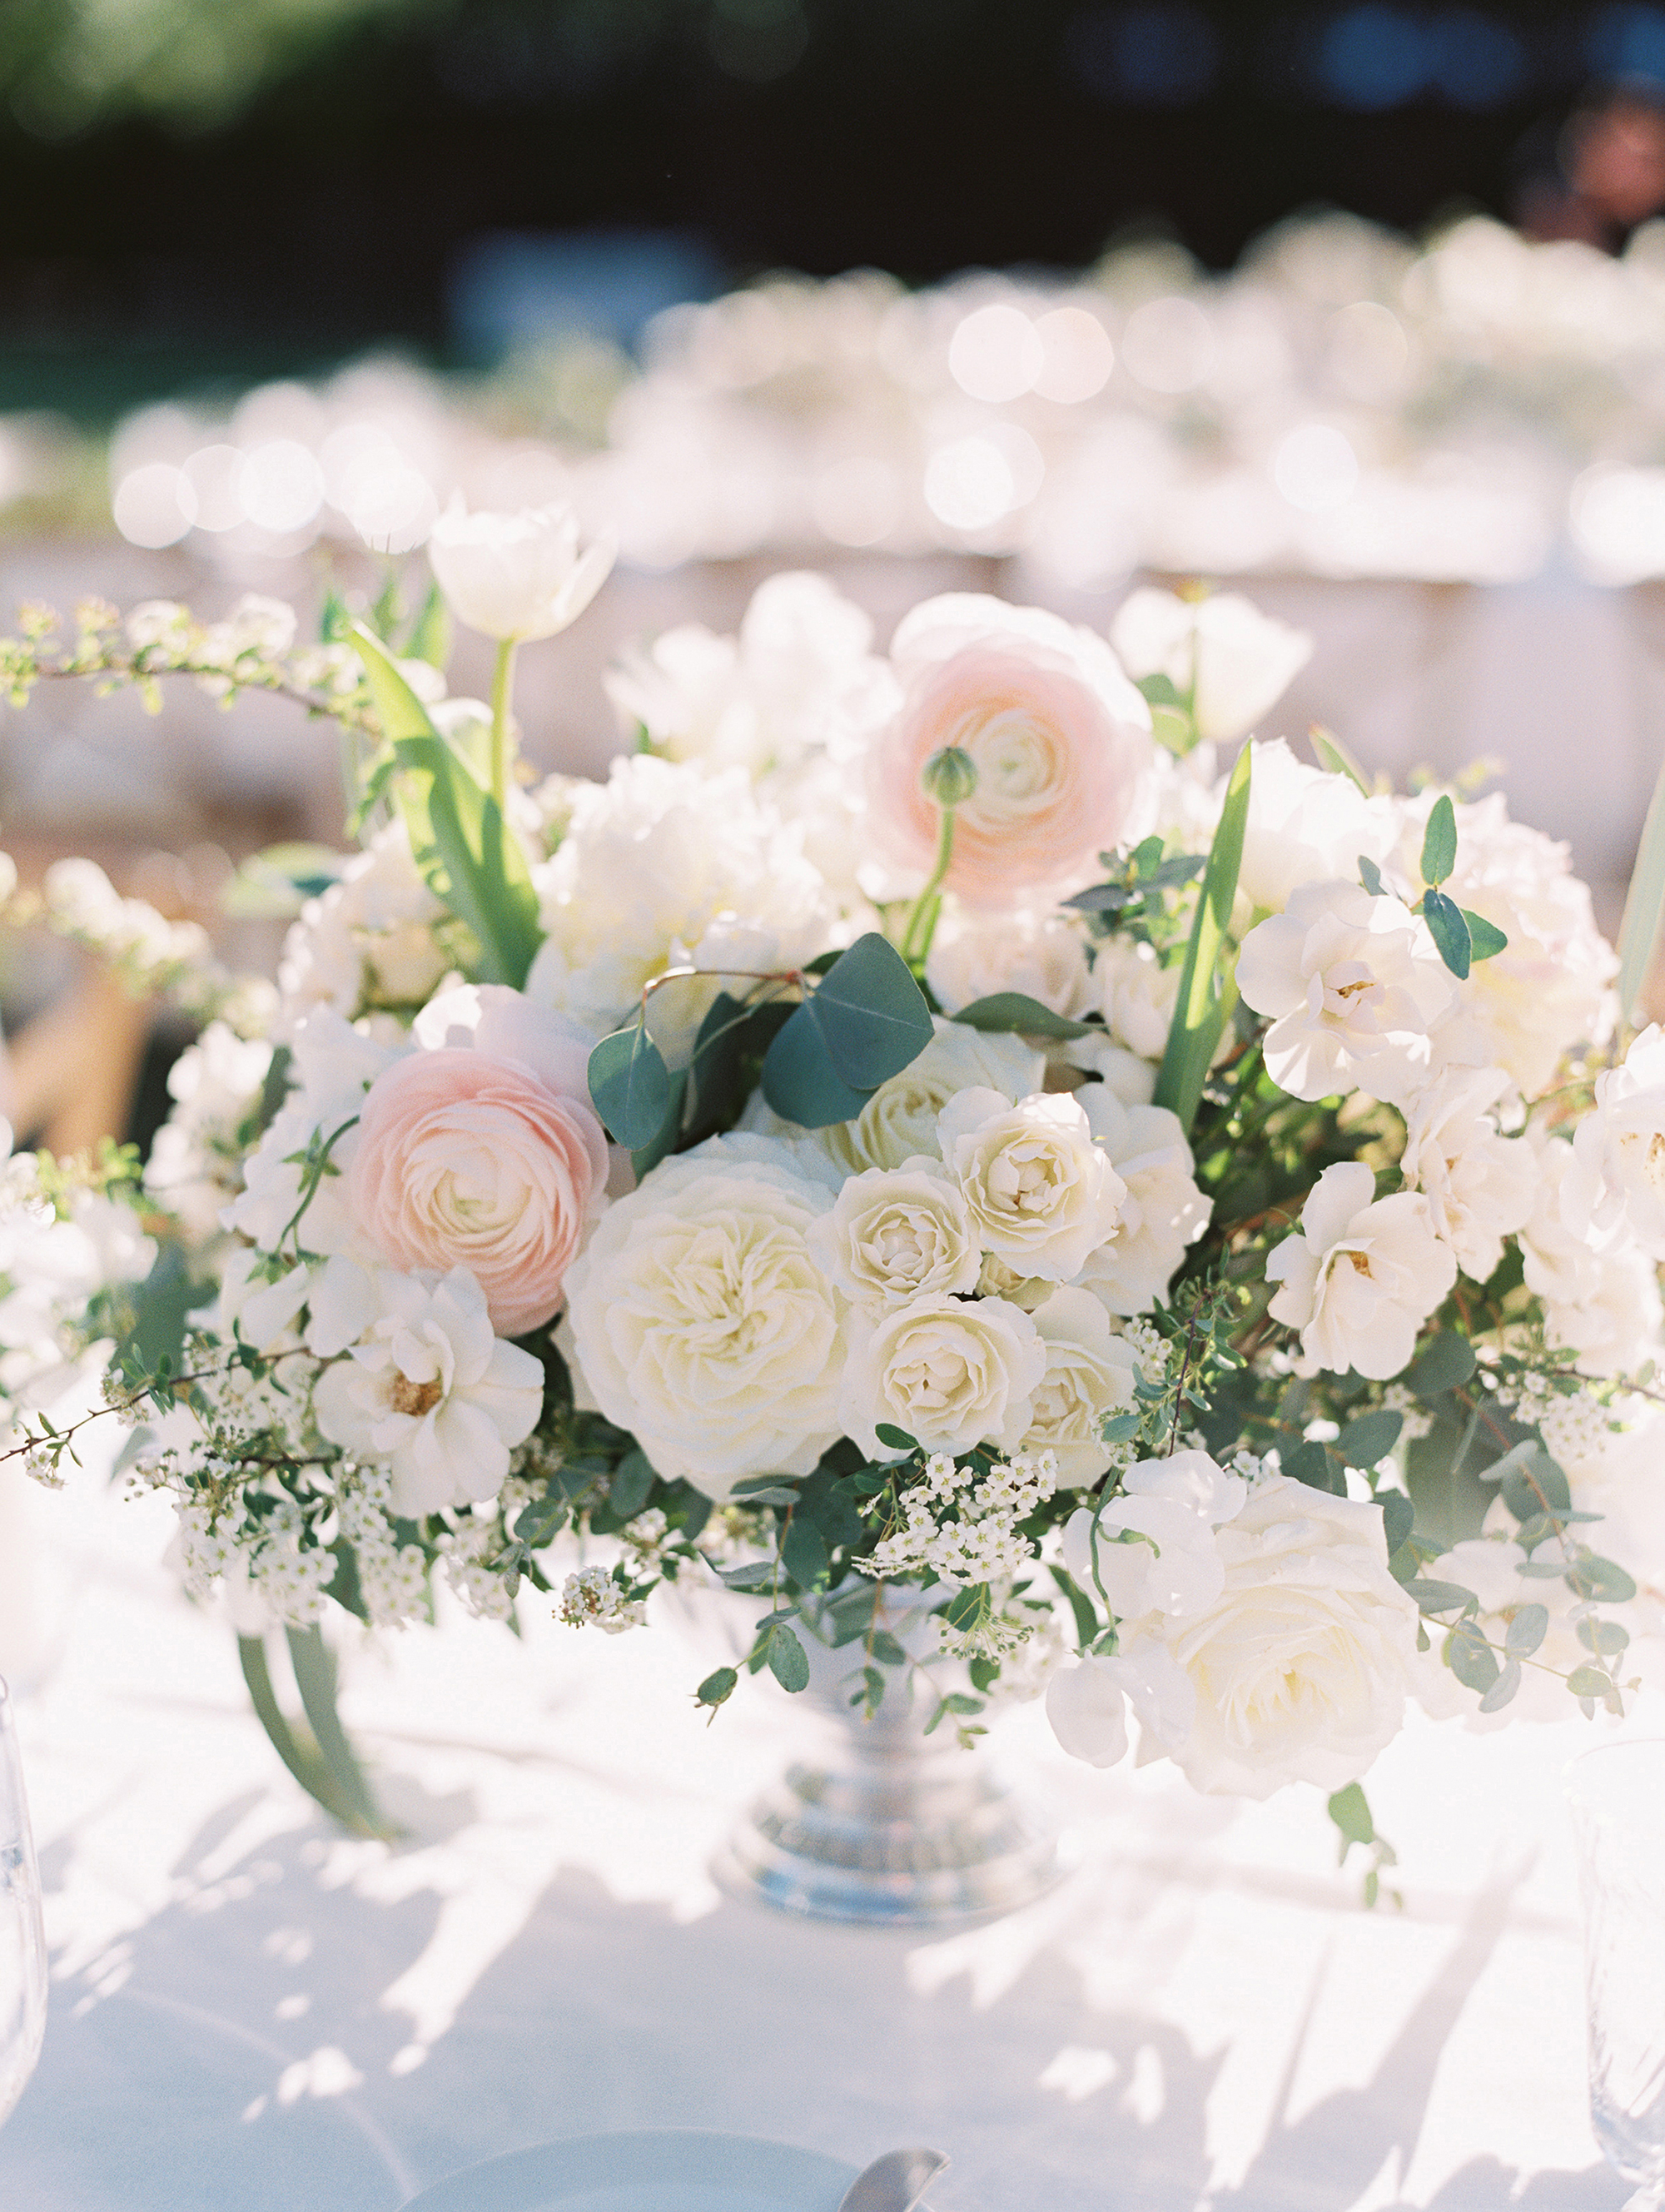 30 Rose Centerpieces That Will Upgrade Your Reception Tables | Martha